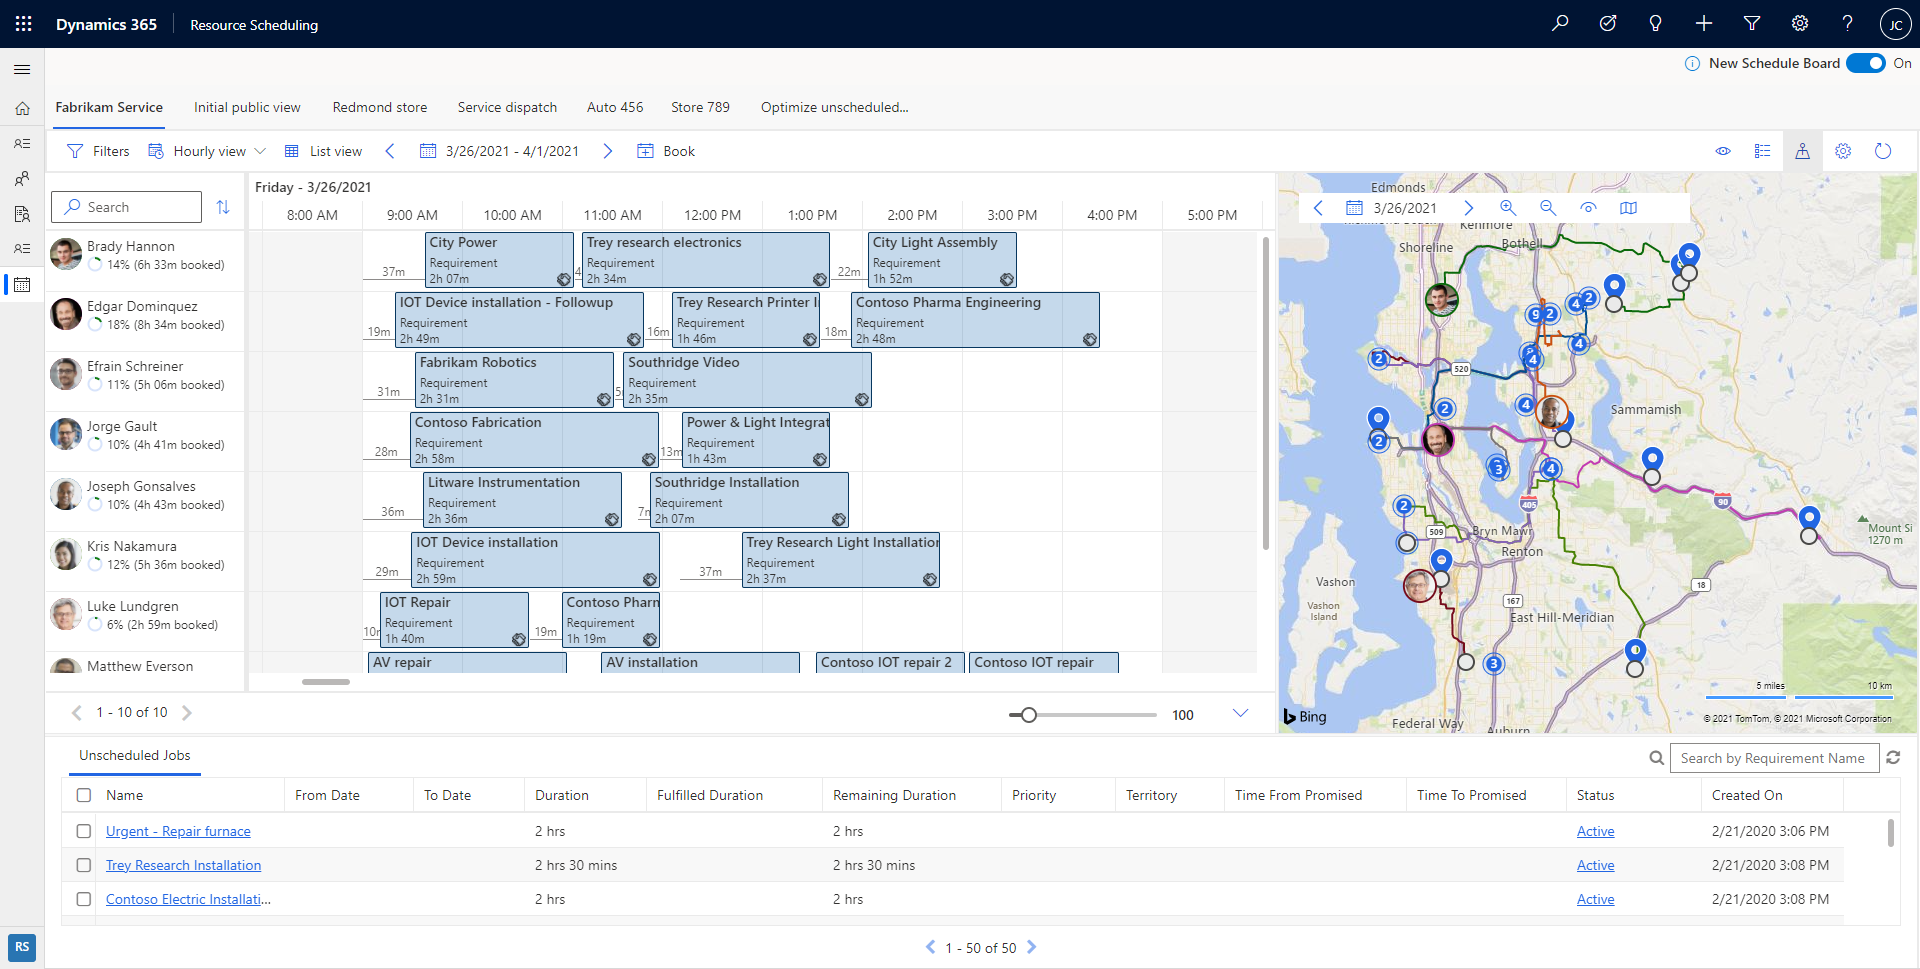 Screenshot of the new schedule board in Dynamics 365, showing the resources and requirements.